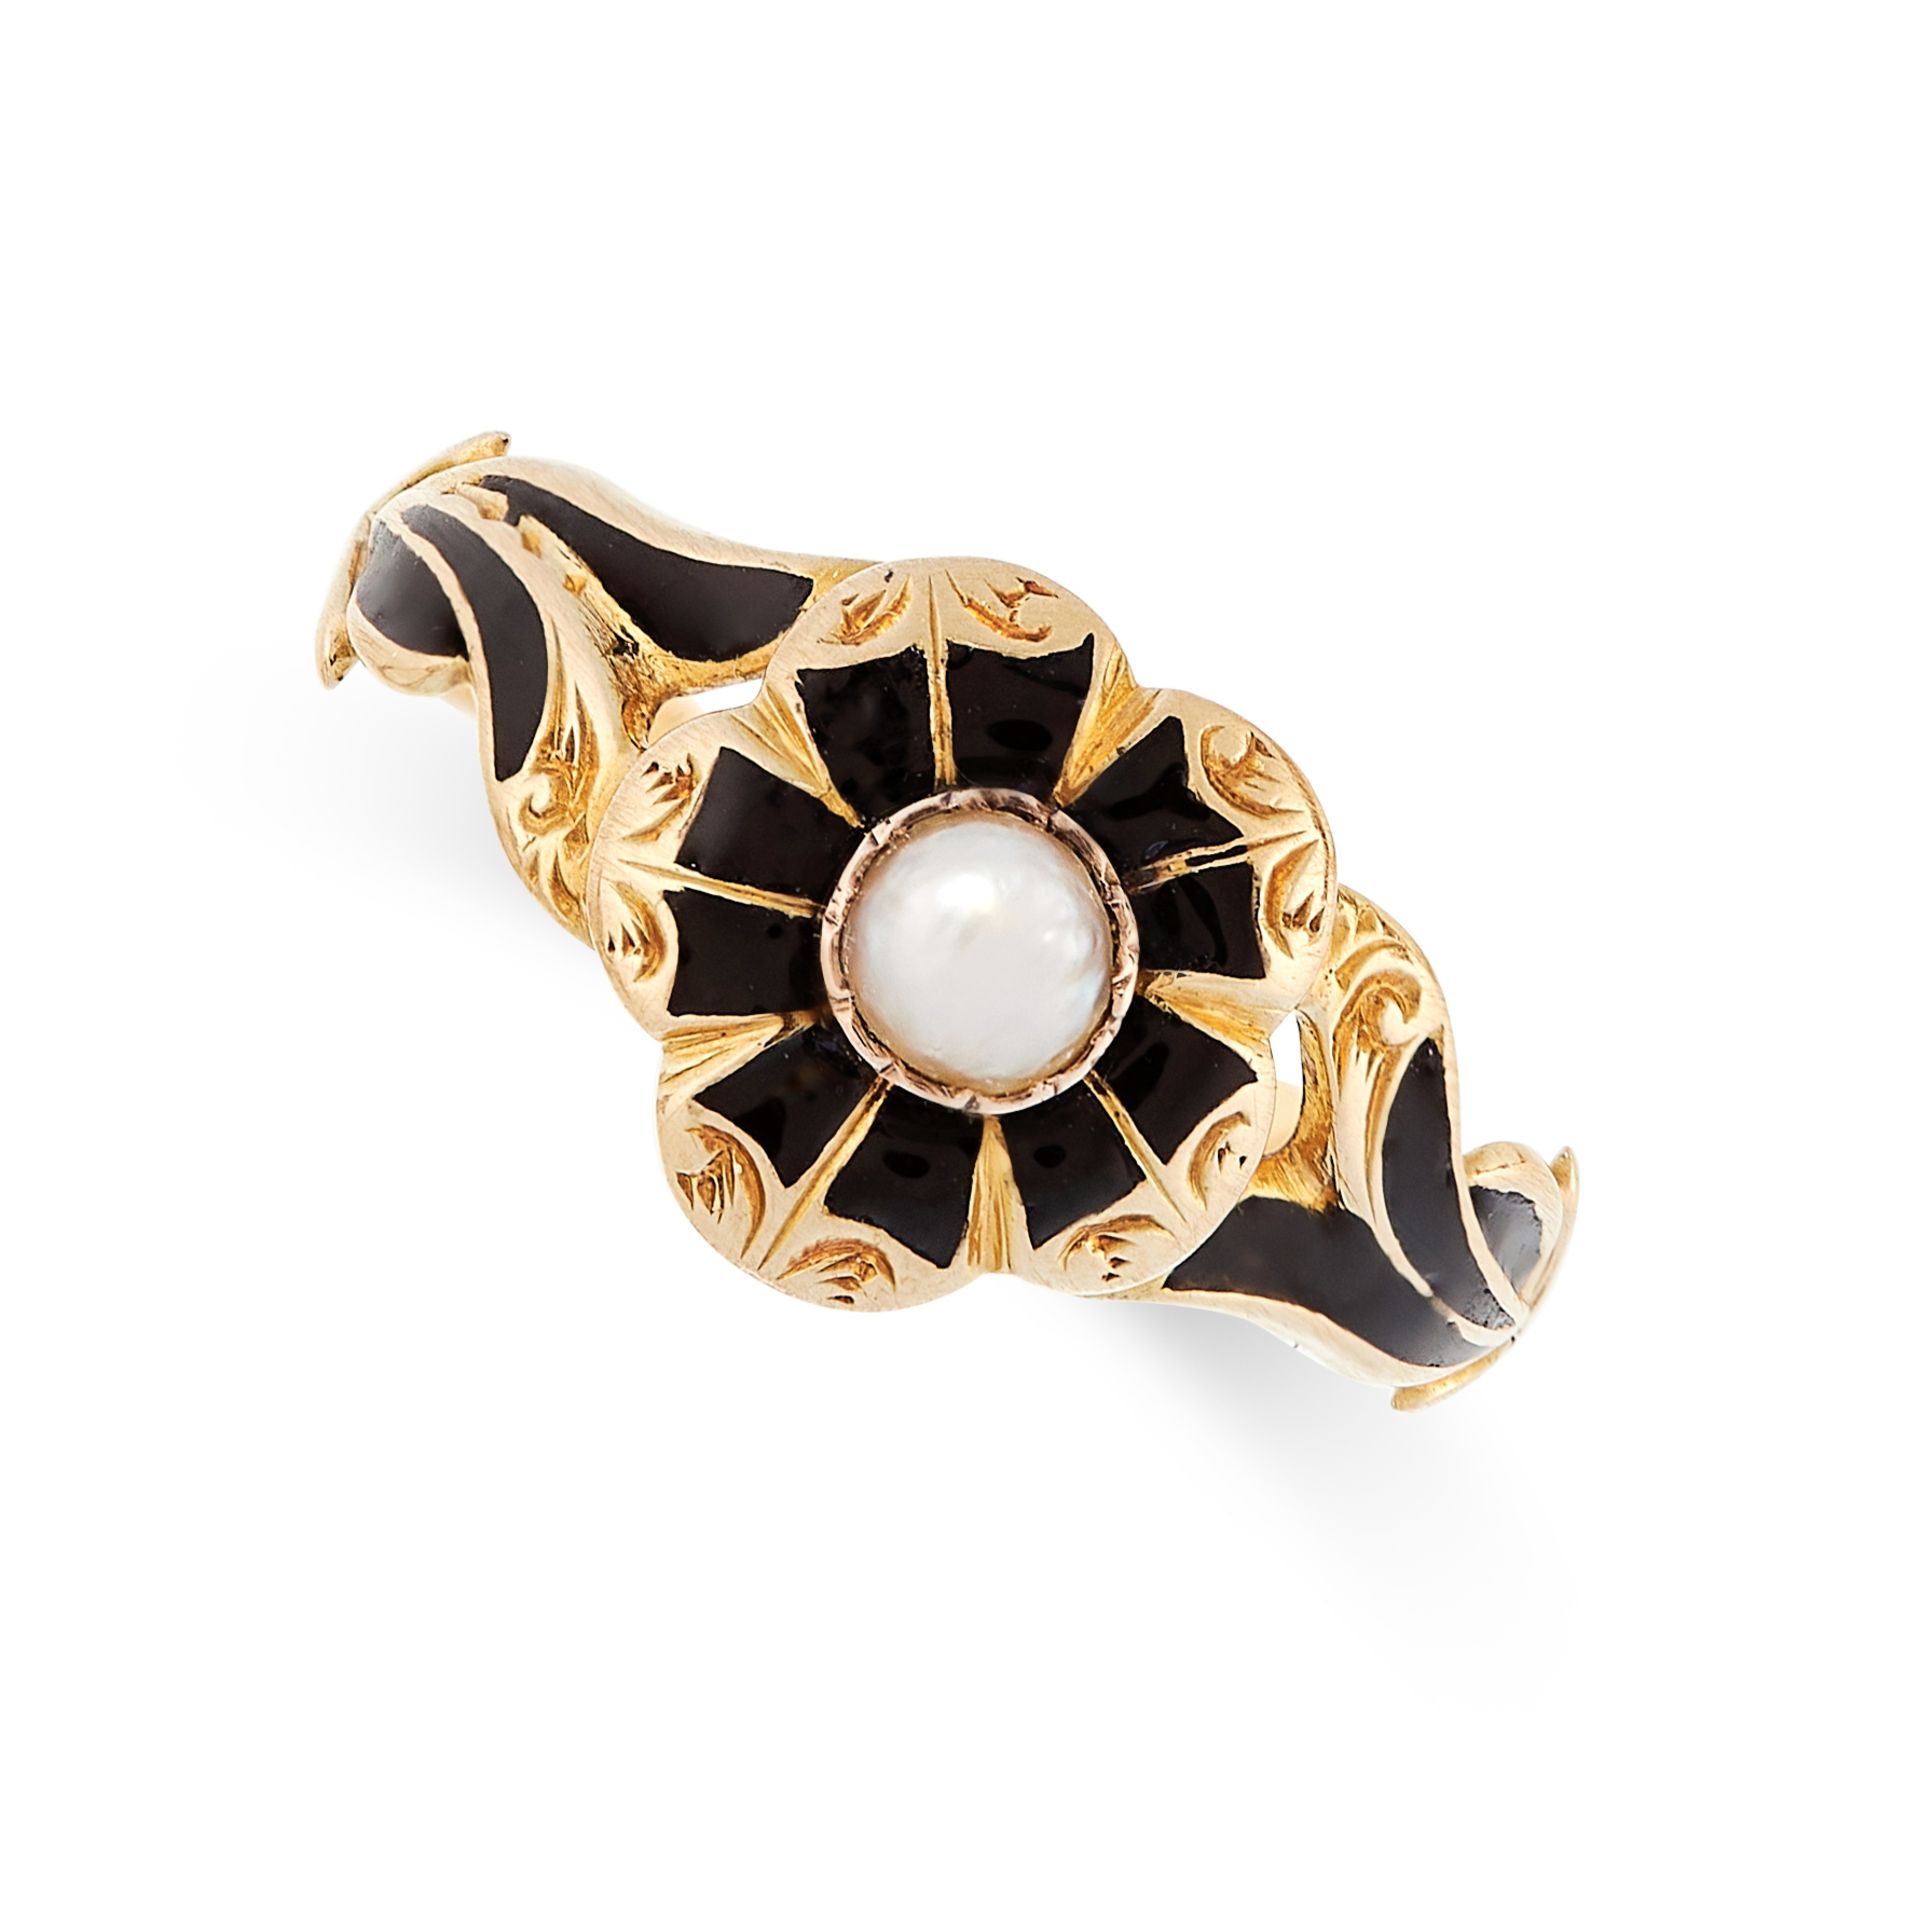 AN ANTIQUE HAIRWORK, PEARL AND ENAMEL MOURNING RING in yellow gold, designed as a flower, the centre